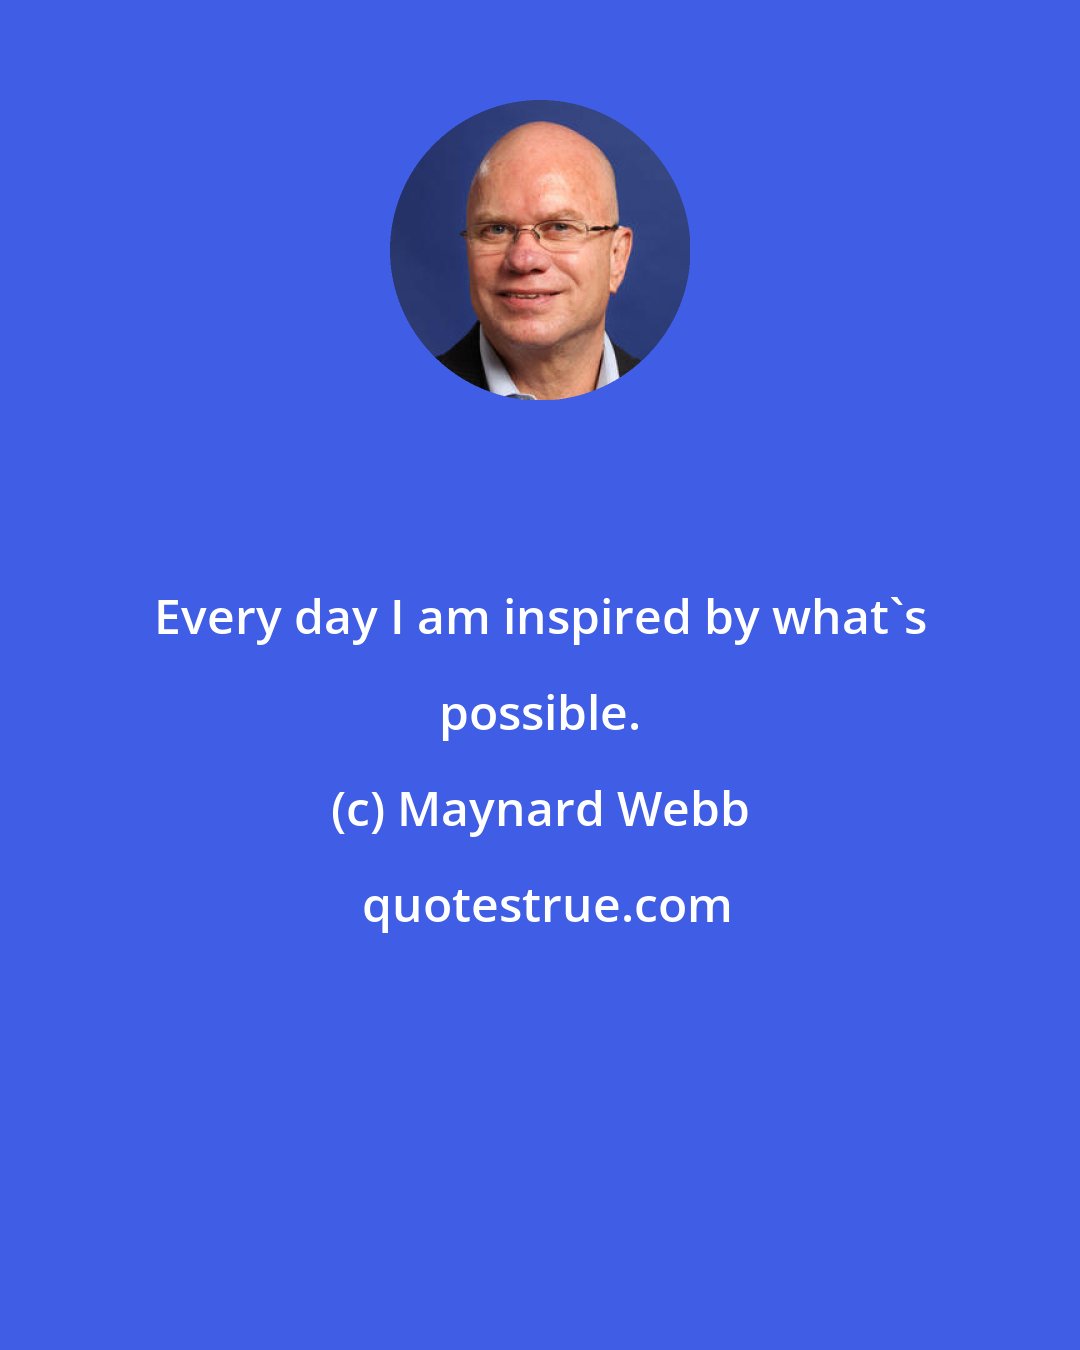 Maynard Webb: Every day I am inspired by what's possible.